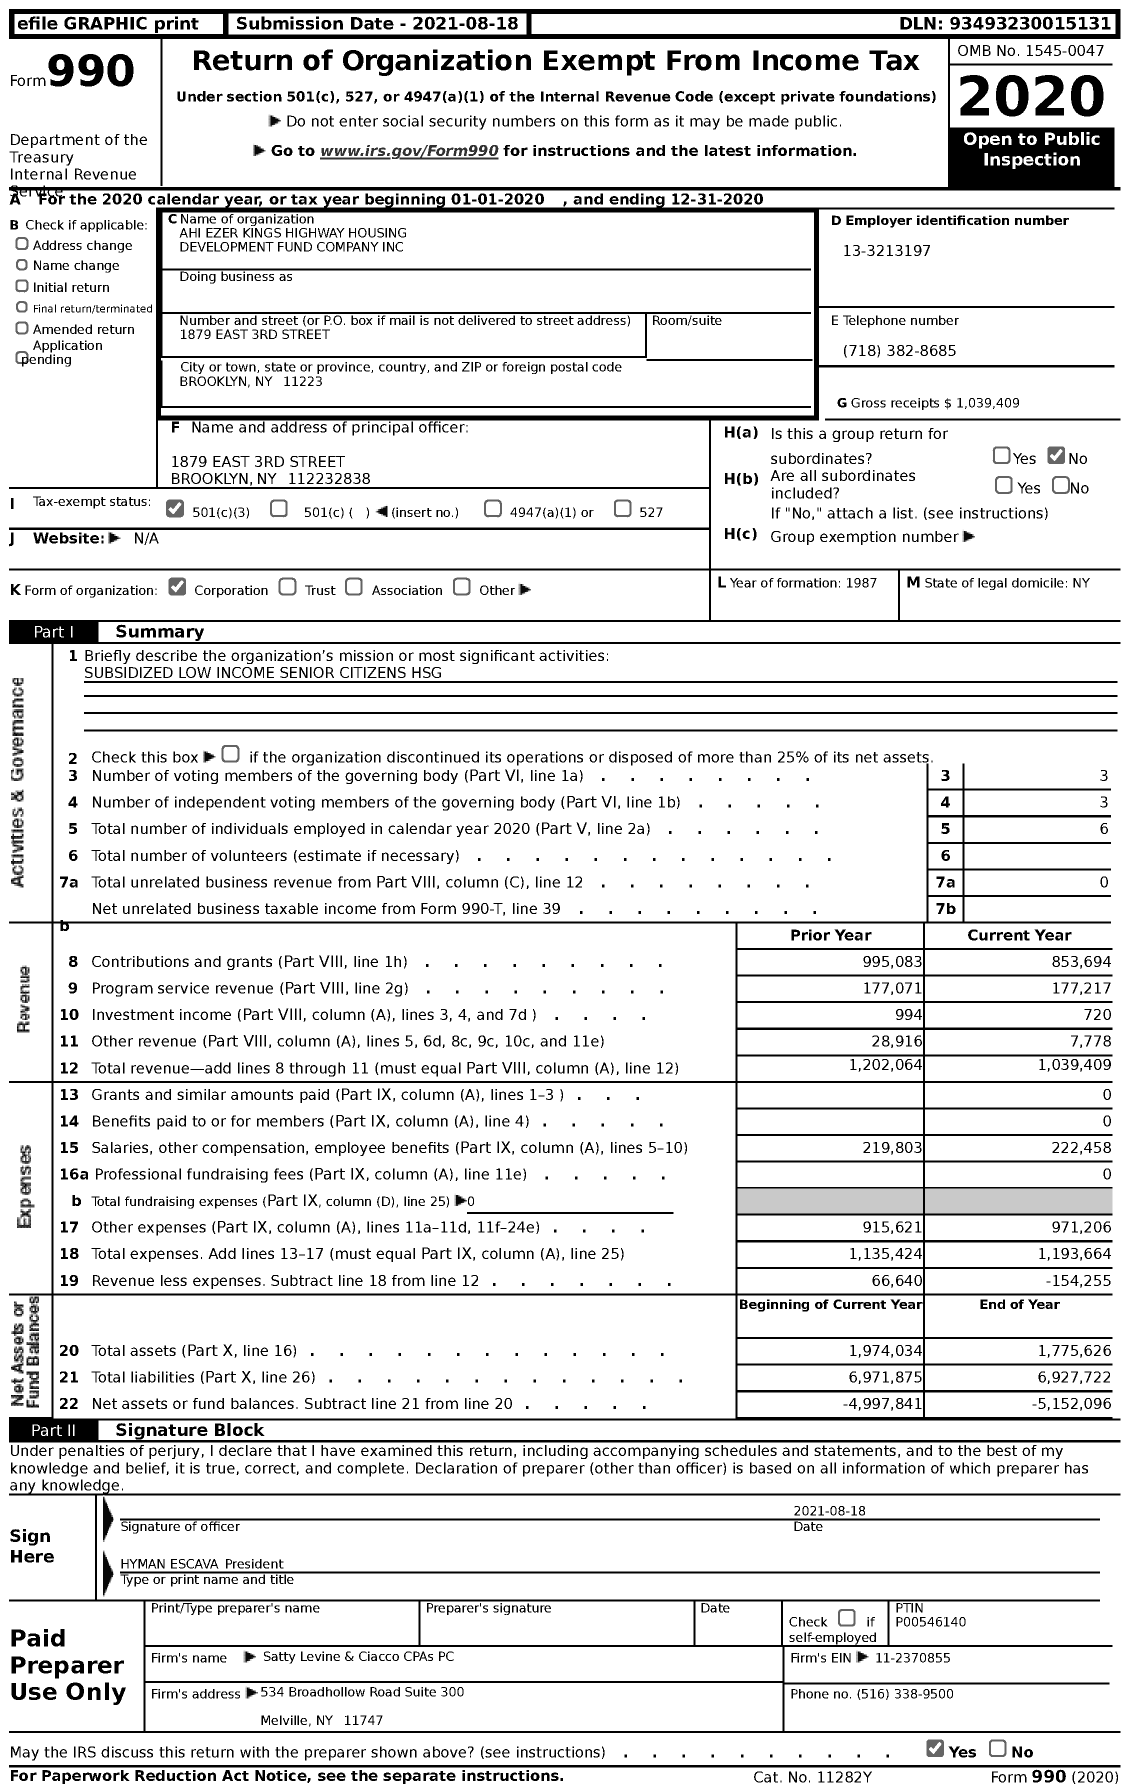 Image of first page of 2020 Form 990 for Ahi Ezer Kings Highway Housing Development Fund Company